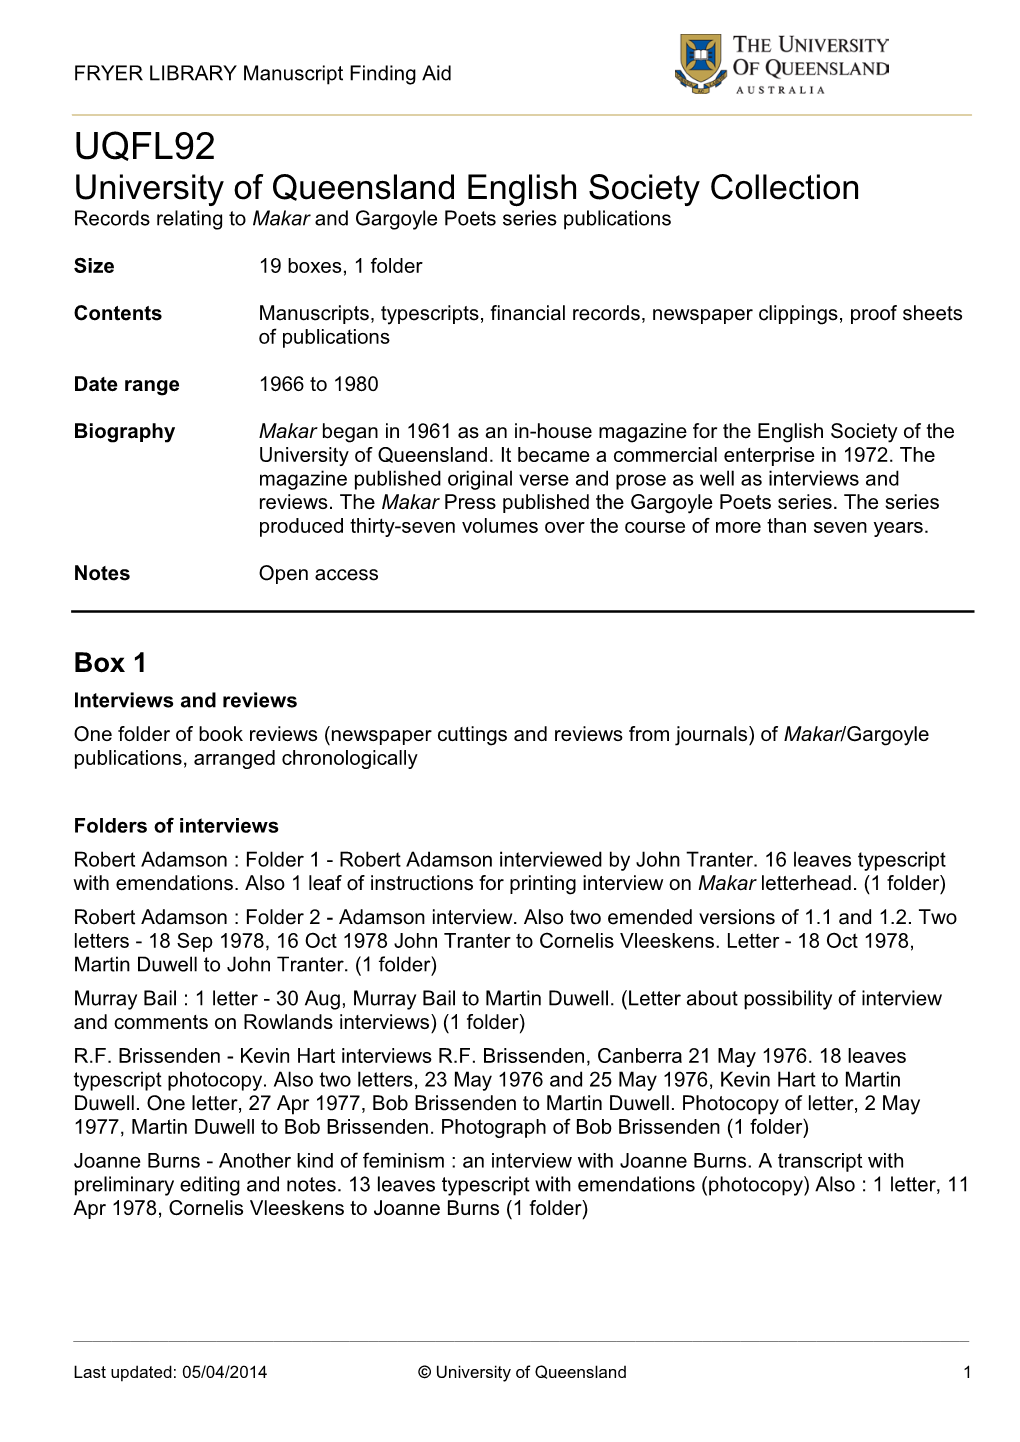 UQFL92 University of Queensland English Society Collection Records Relating to Makar and Gargoyle Poets Series Publications